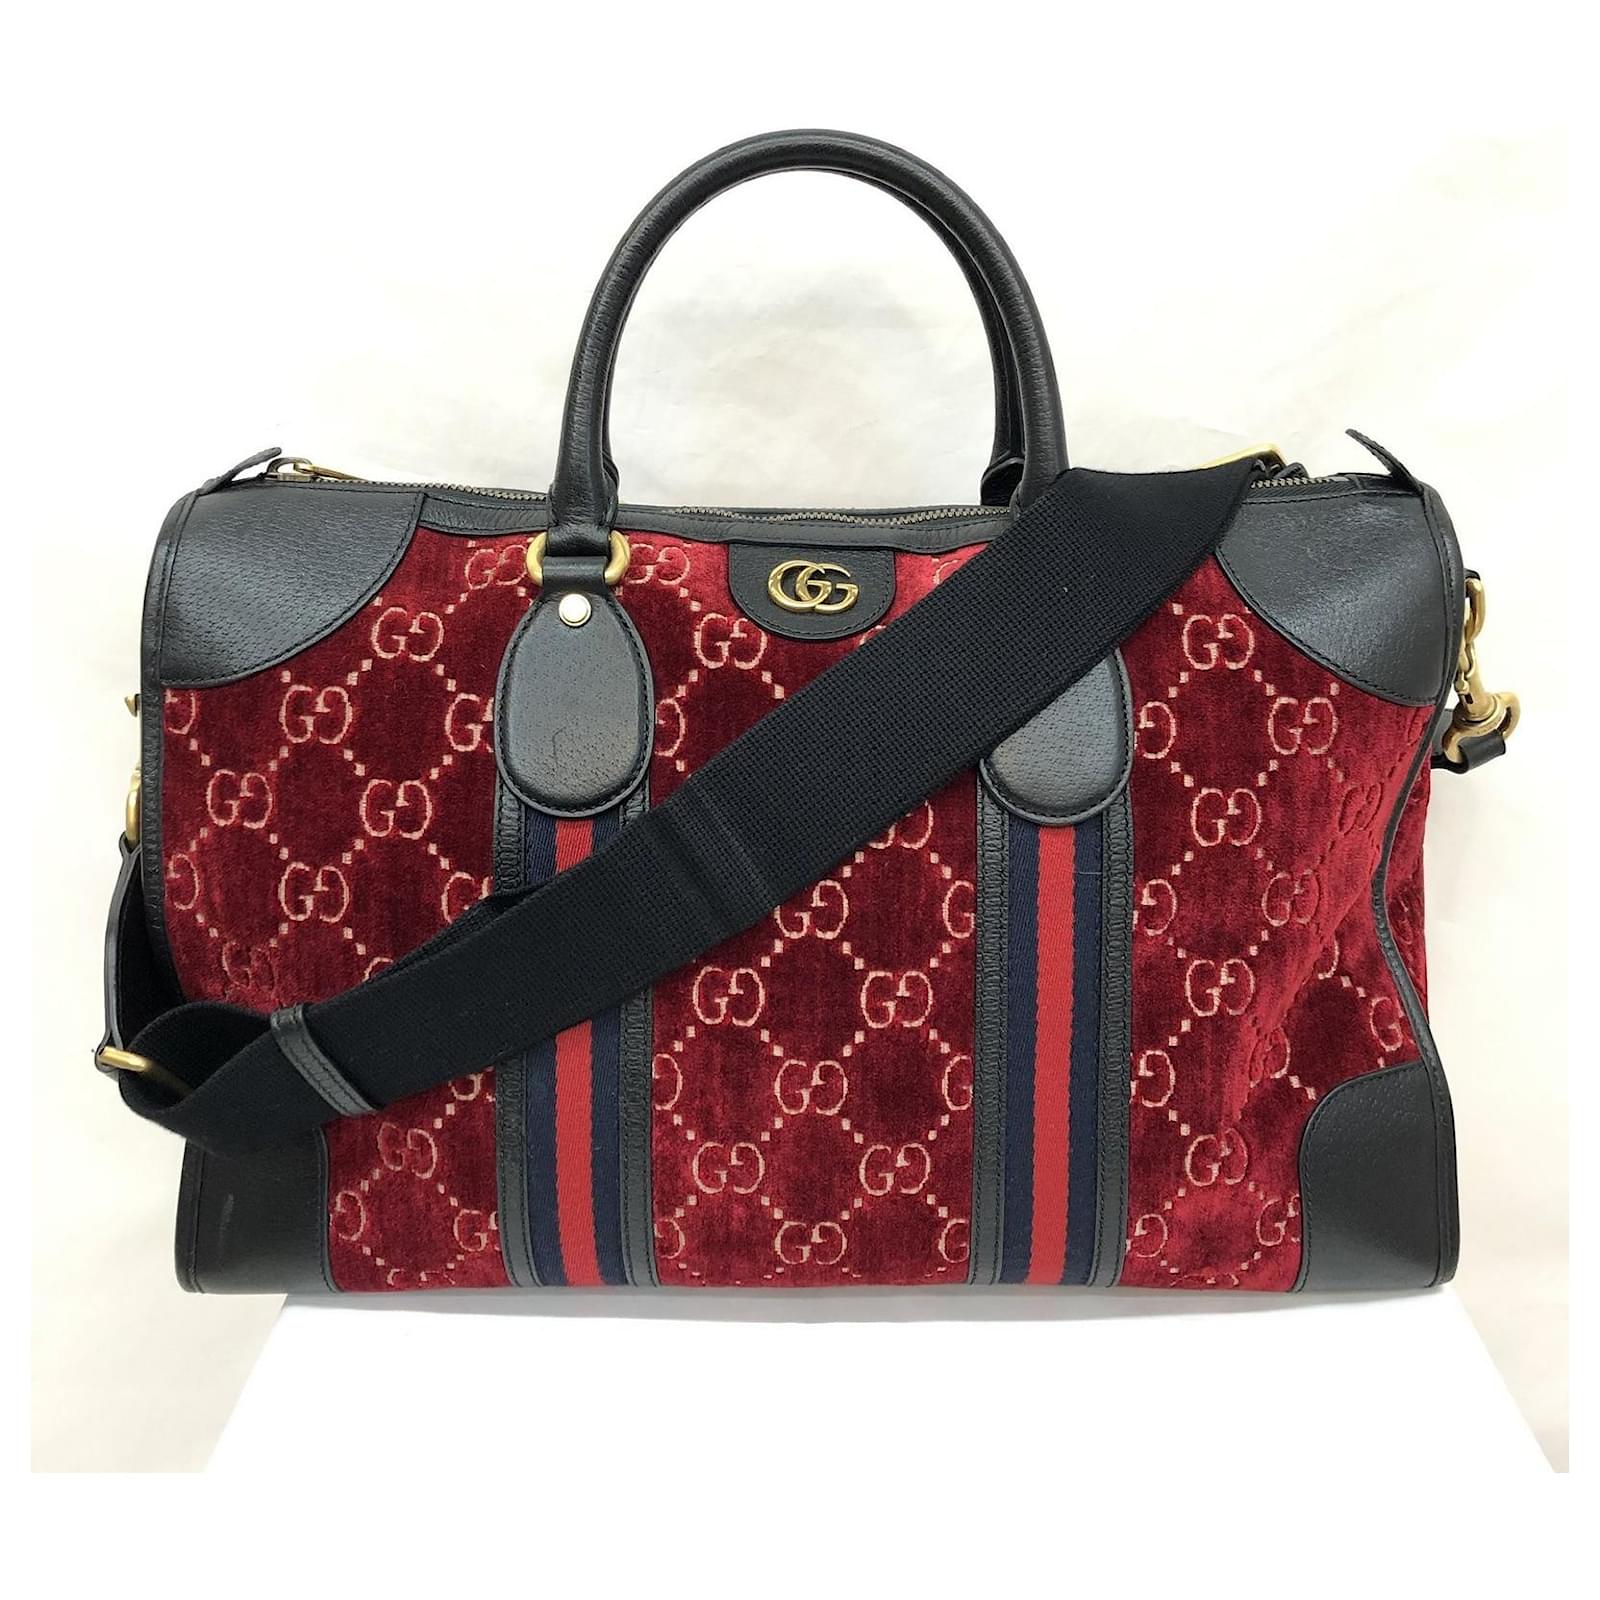 Boston Bag - Red and Black